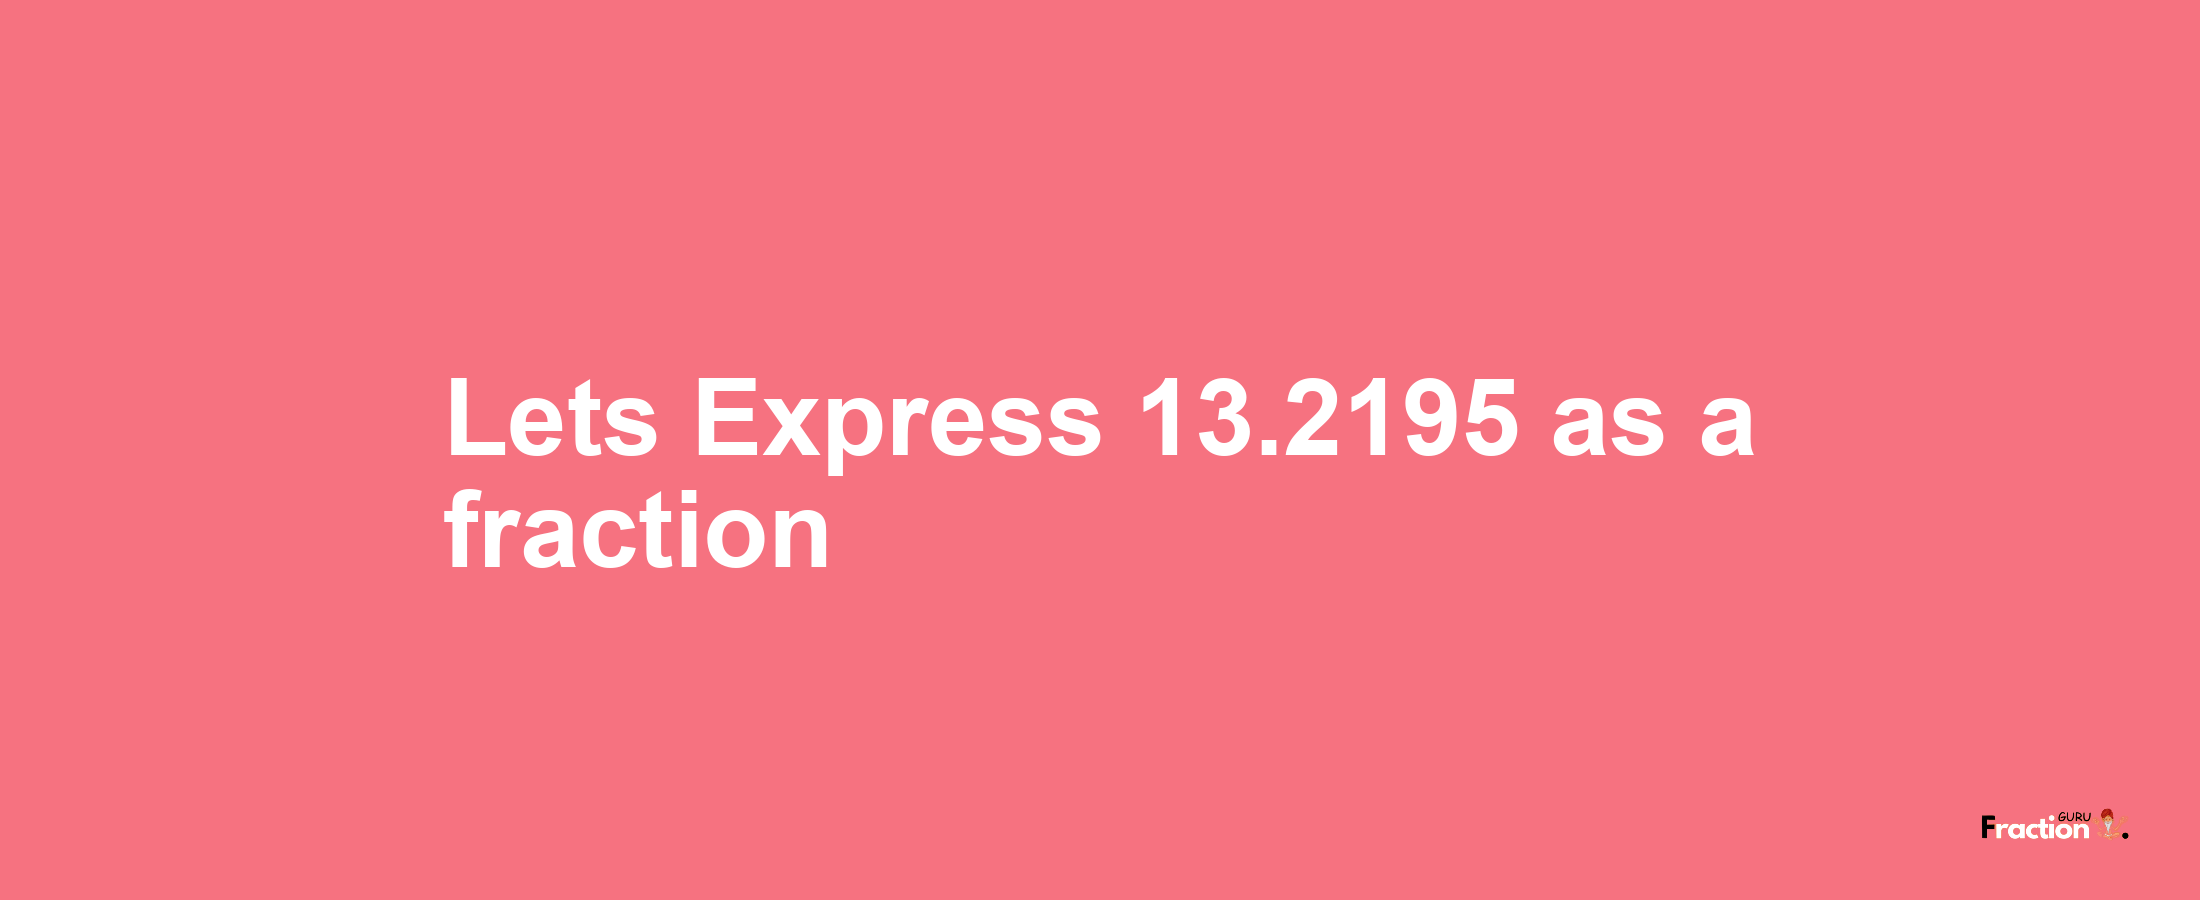 Lets Express 13.2195 as afraction